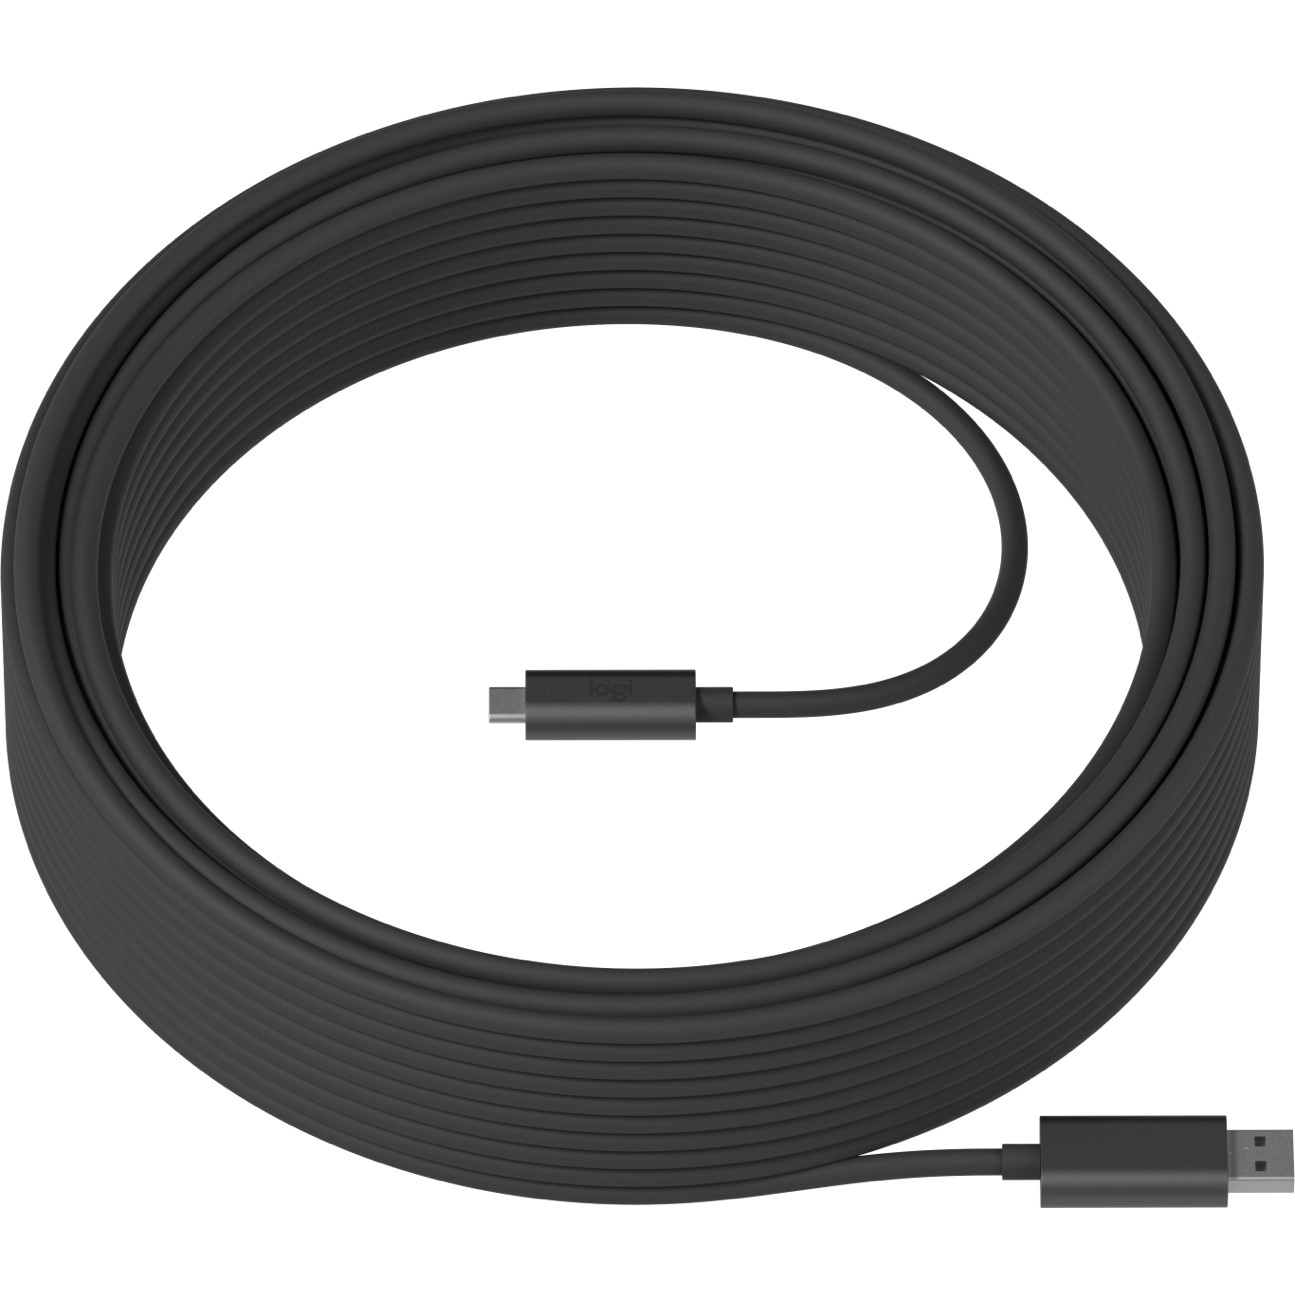 Logitech Strong USB cable - 939-001799